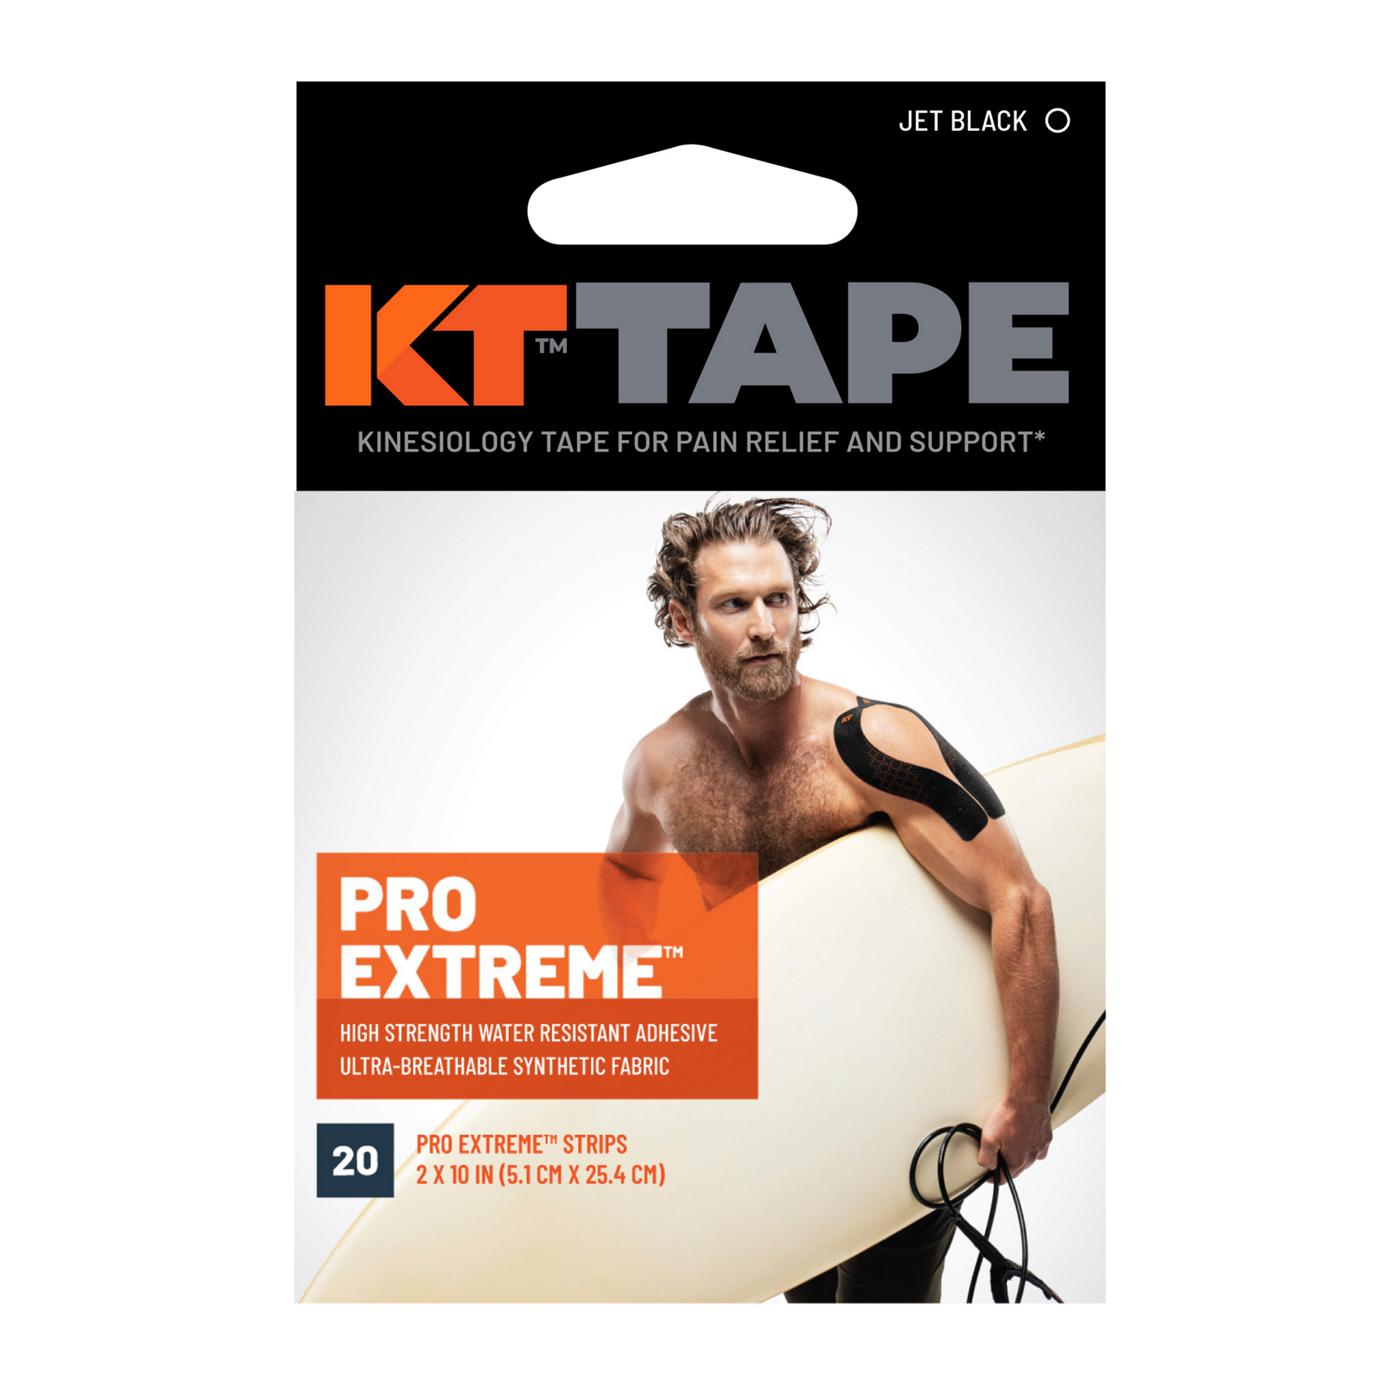 KT Tape Pro Extreme Extra Strength Adhesive Tape - Black; image 1 of 2